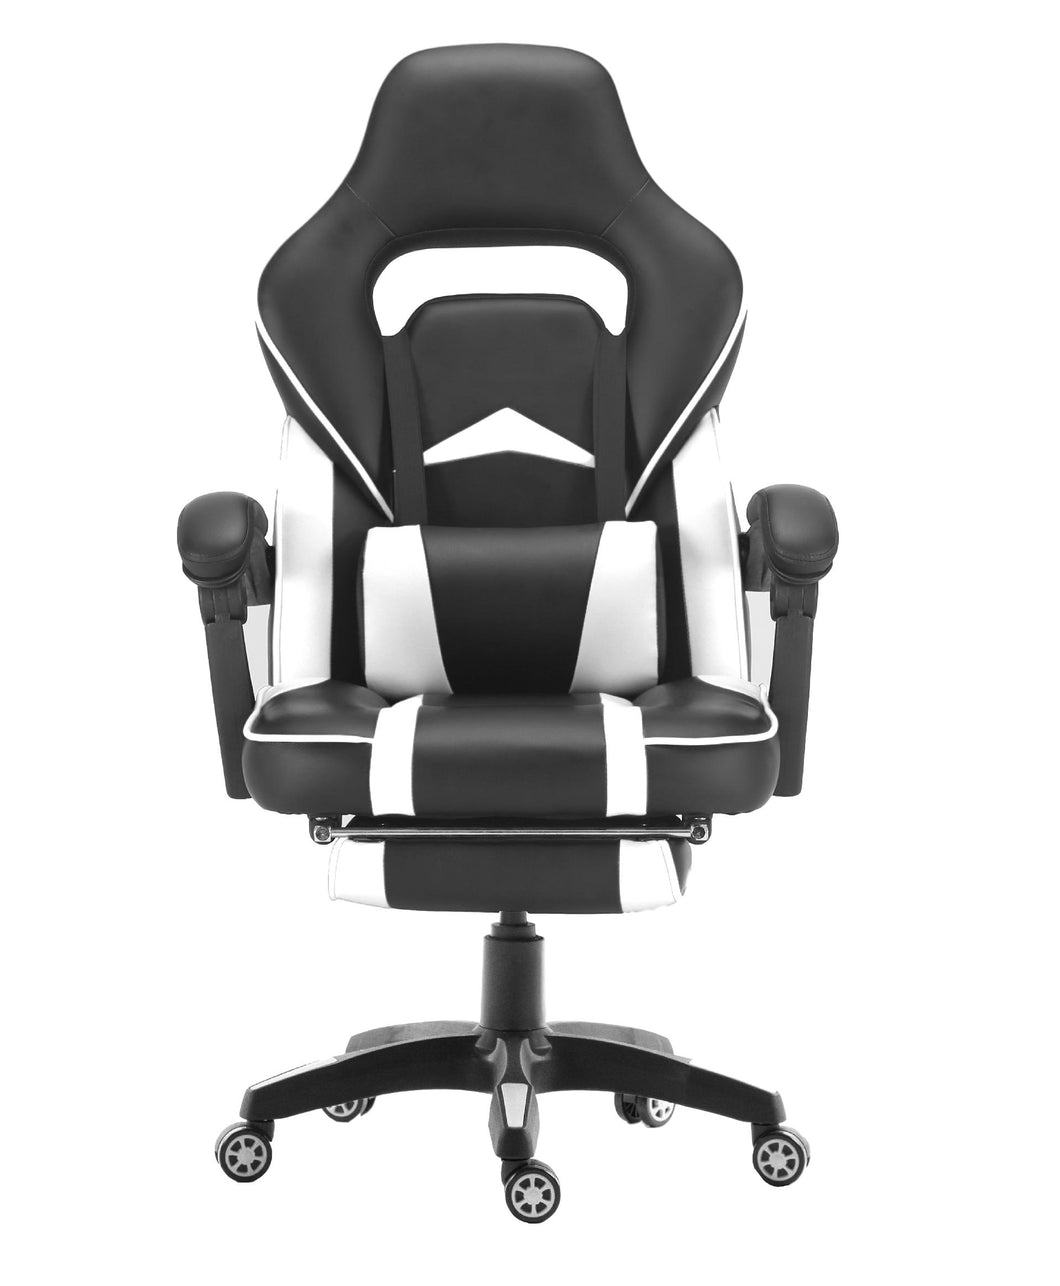 FOOTREST SERIES/ 055 GAMING CHAIR (BLACK & WHITE)